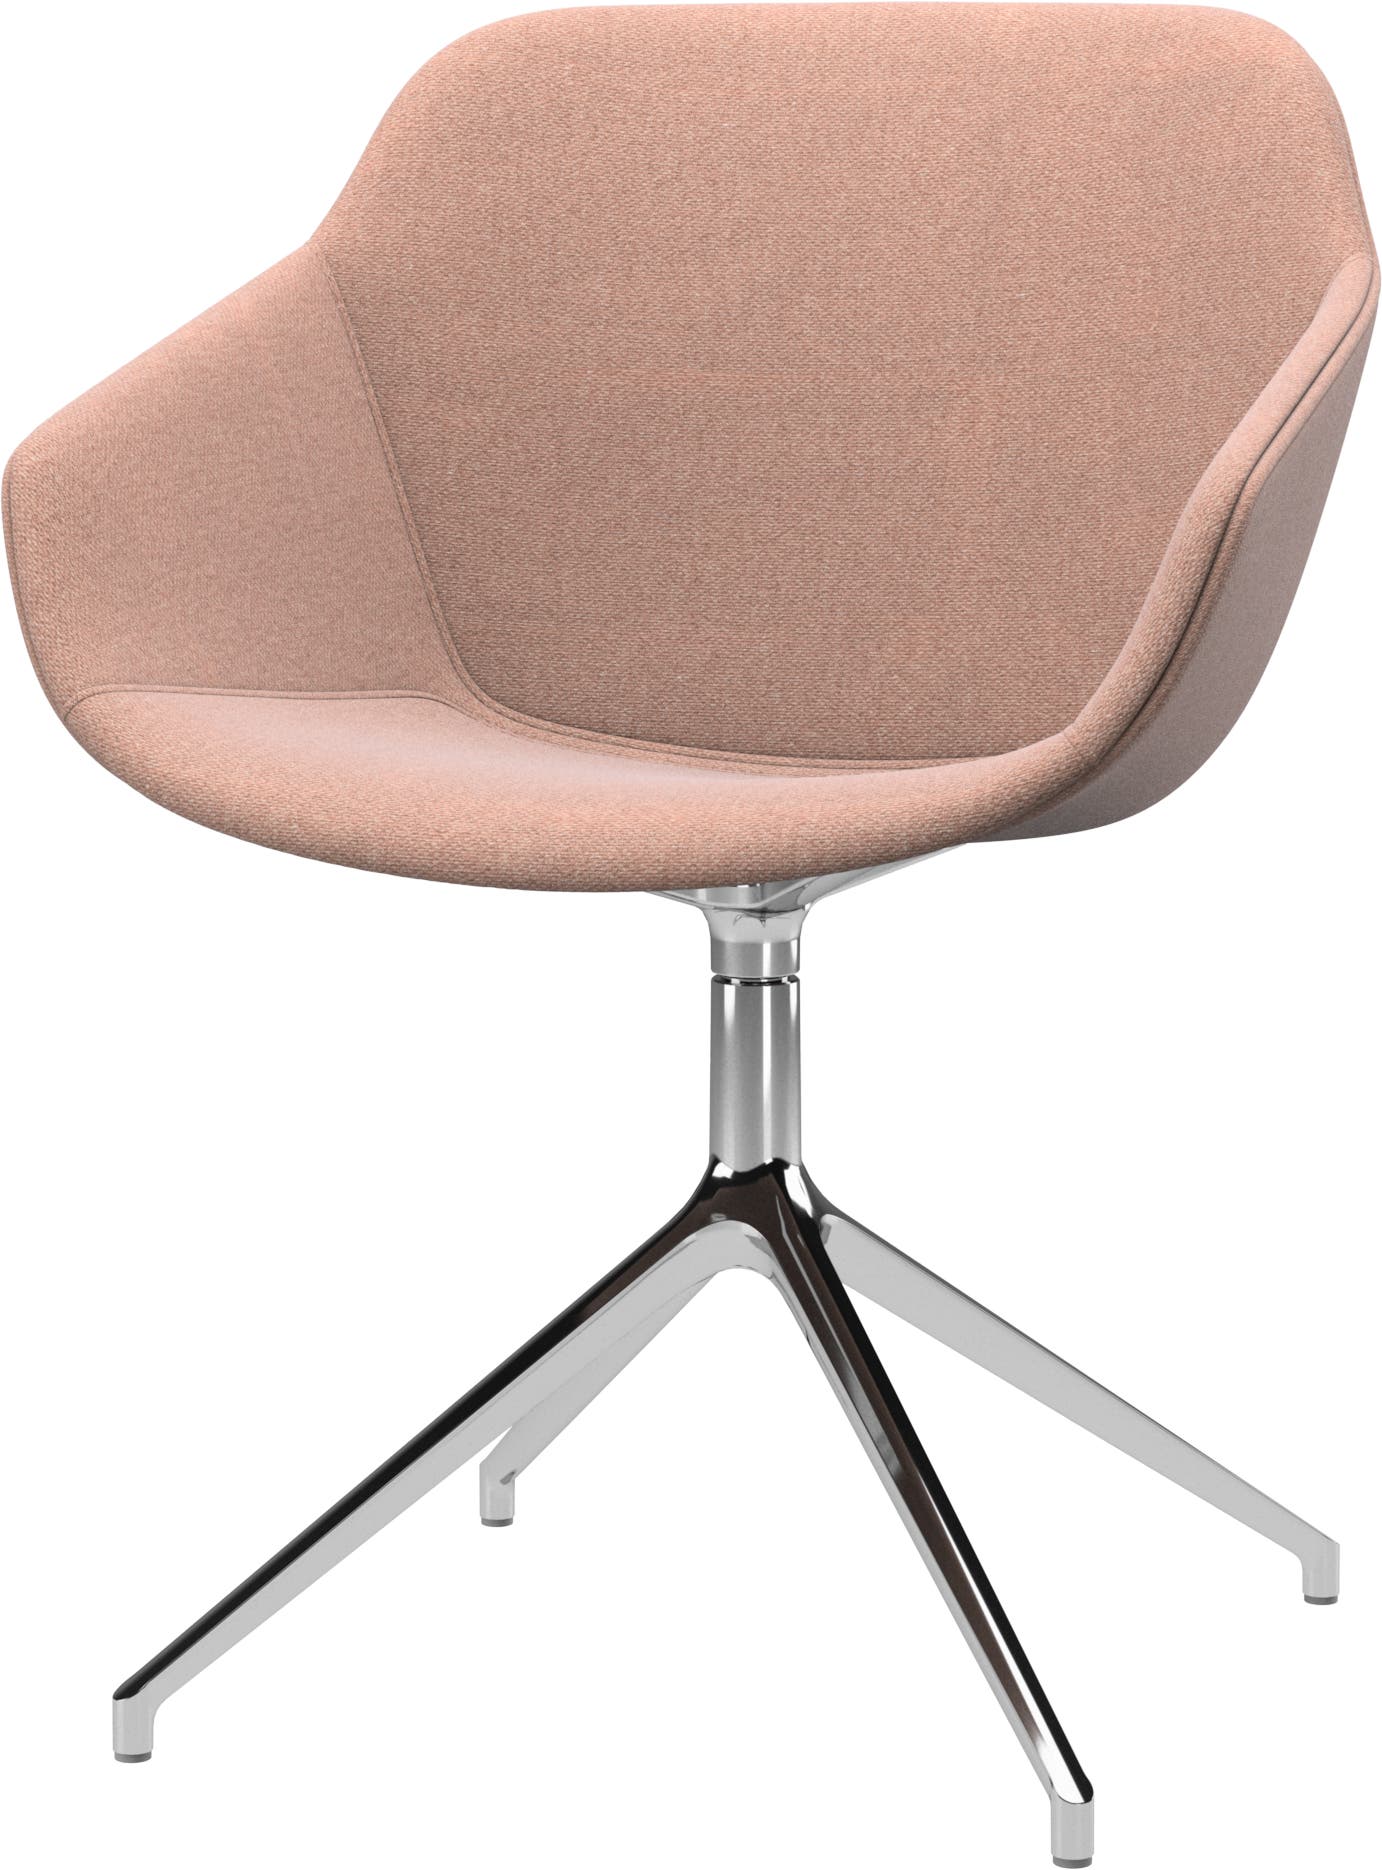 Vienna chair with swivel function